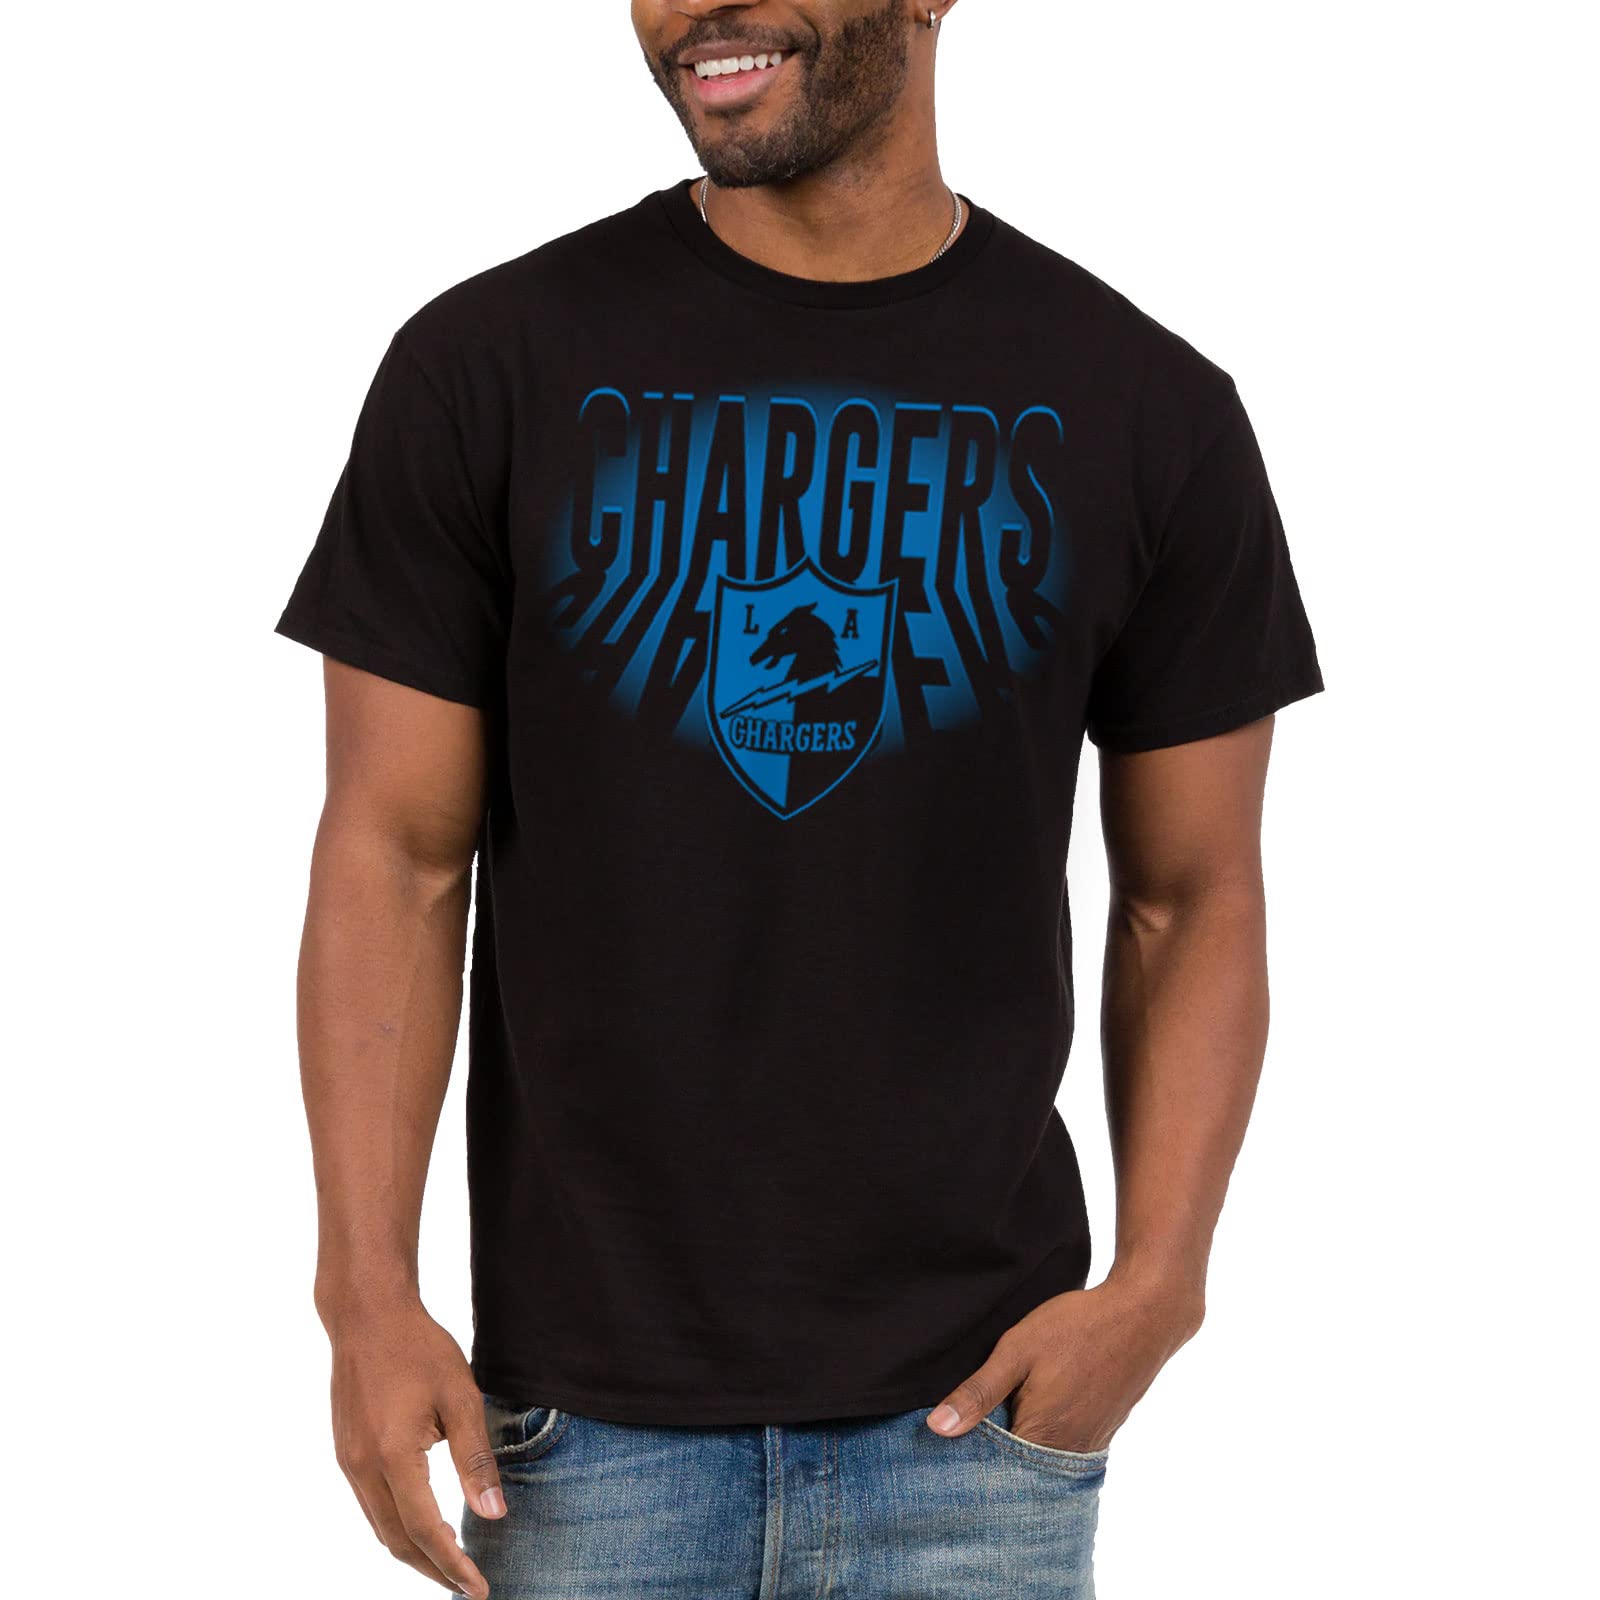 los angeles chargers clothing